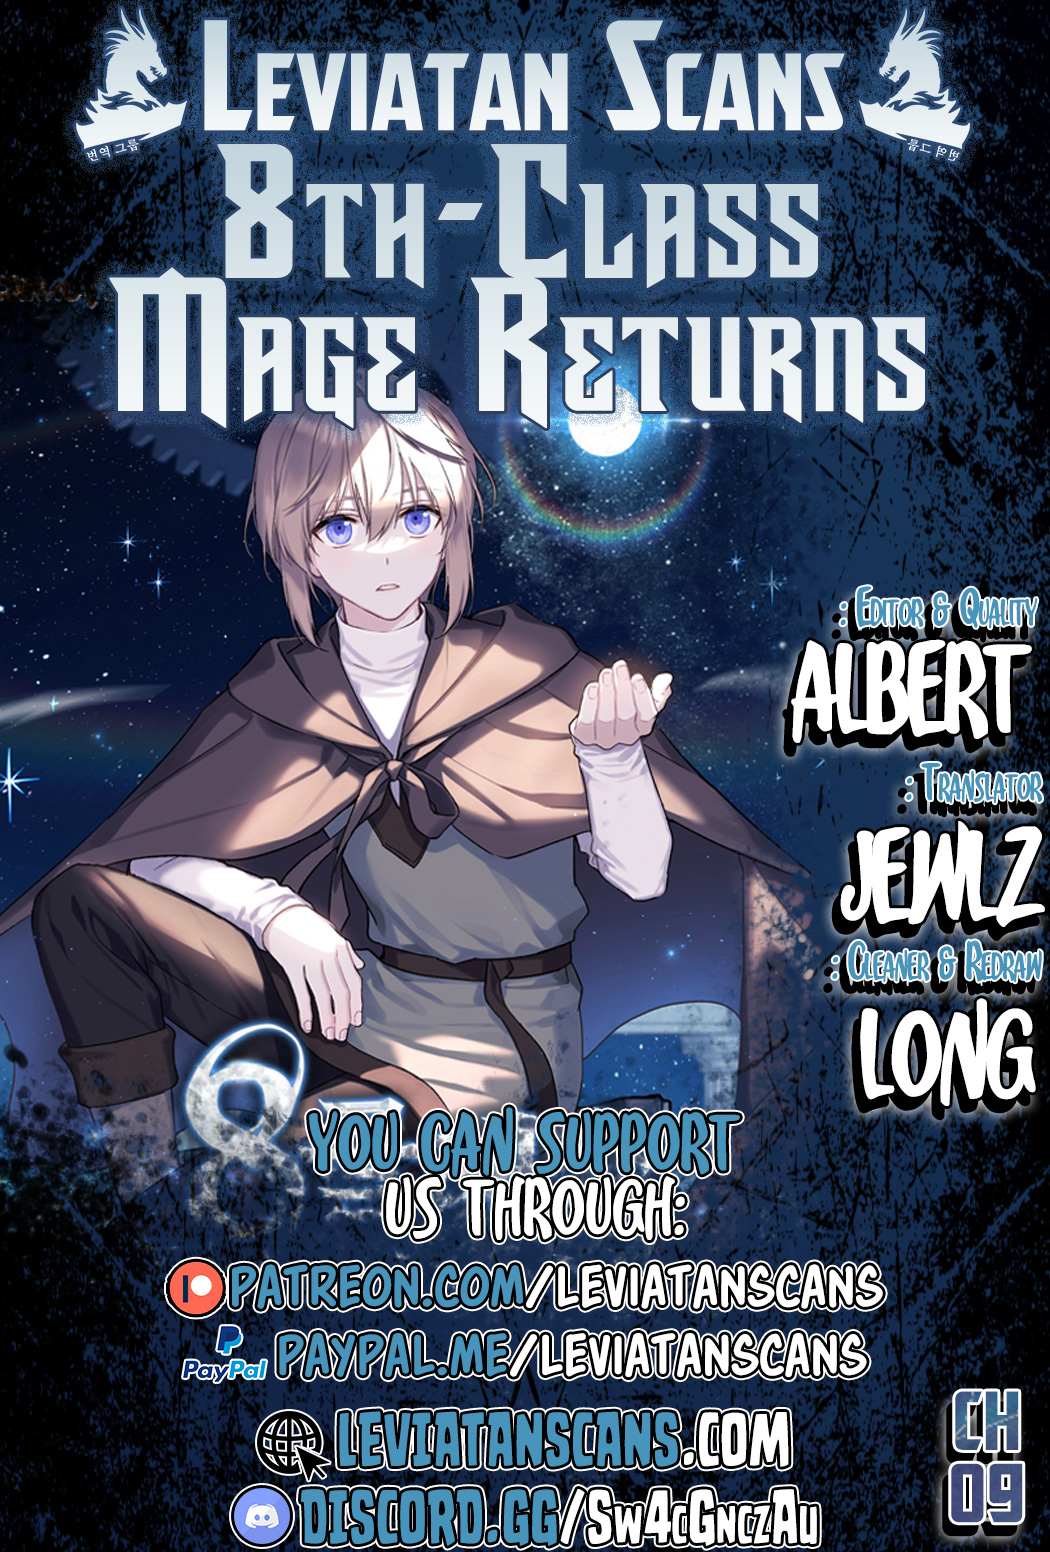 Return of the 8th Class Magician - Chapter 7128 - Image 1